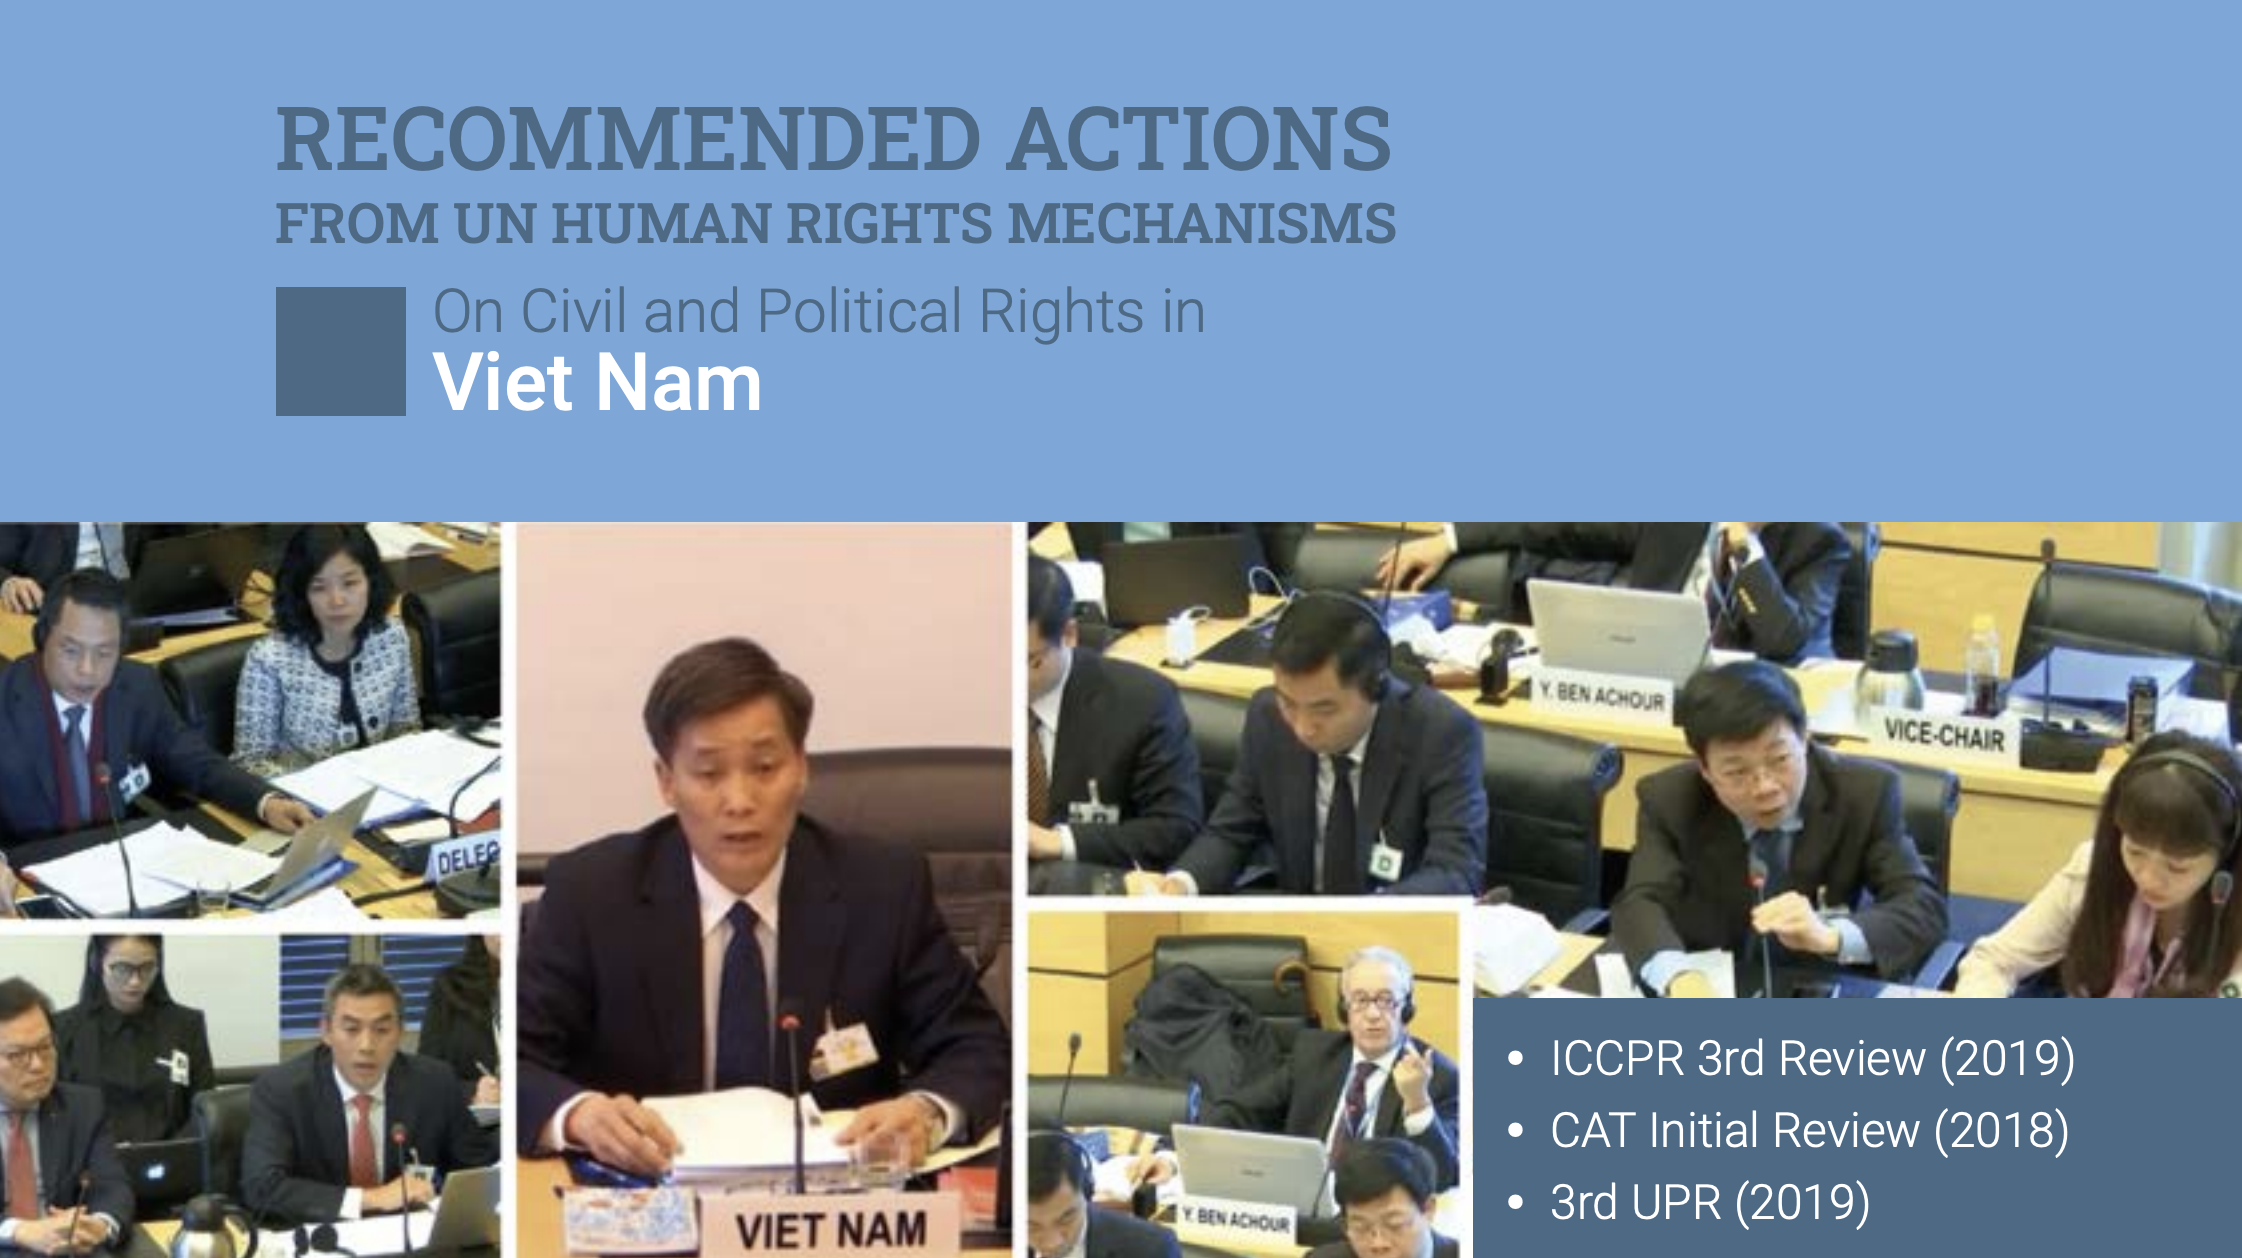 Viet Nam: Recommended Actions from UN HR Mechanisms on Civil and Political Rights